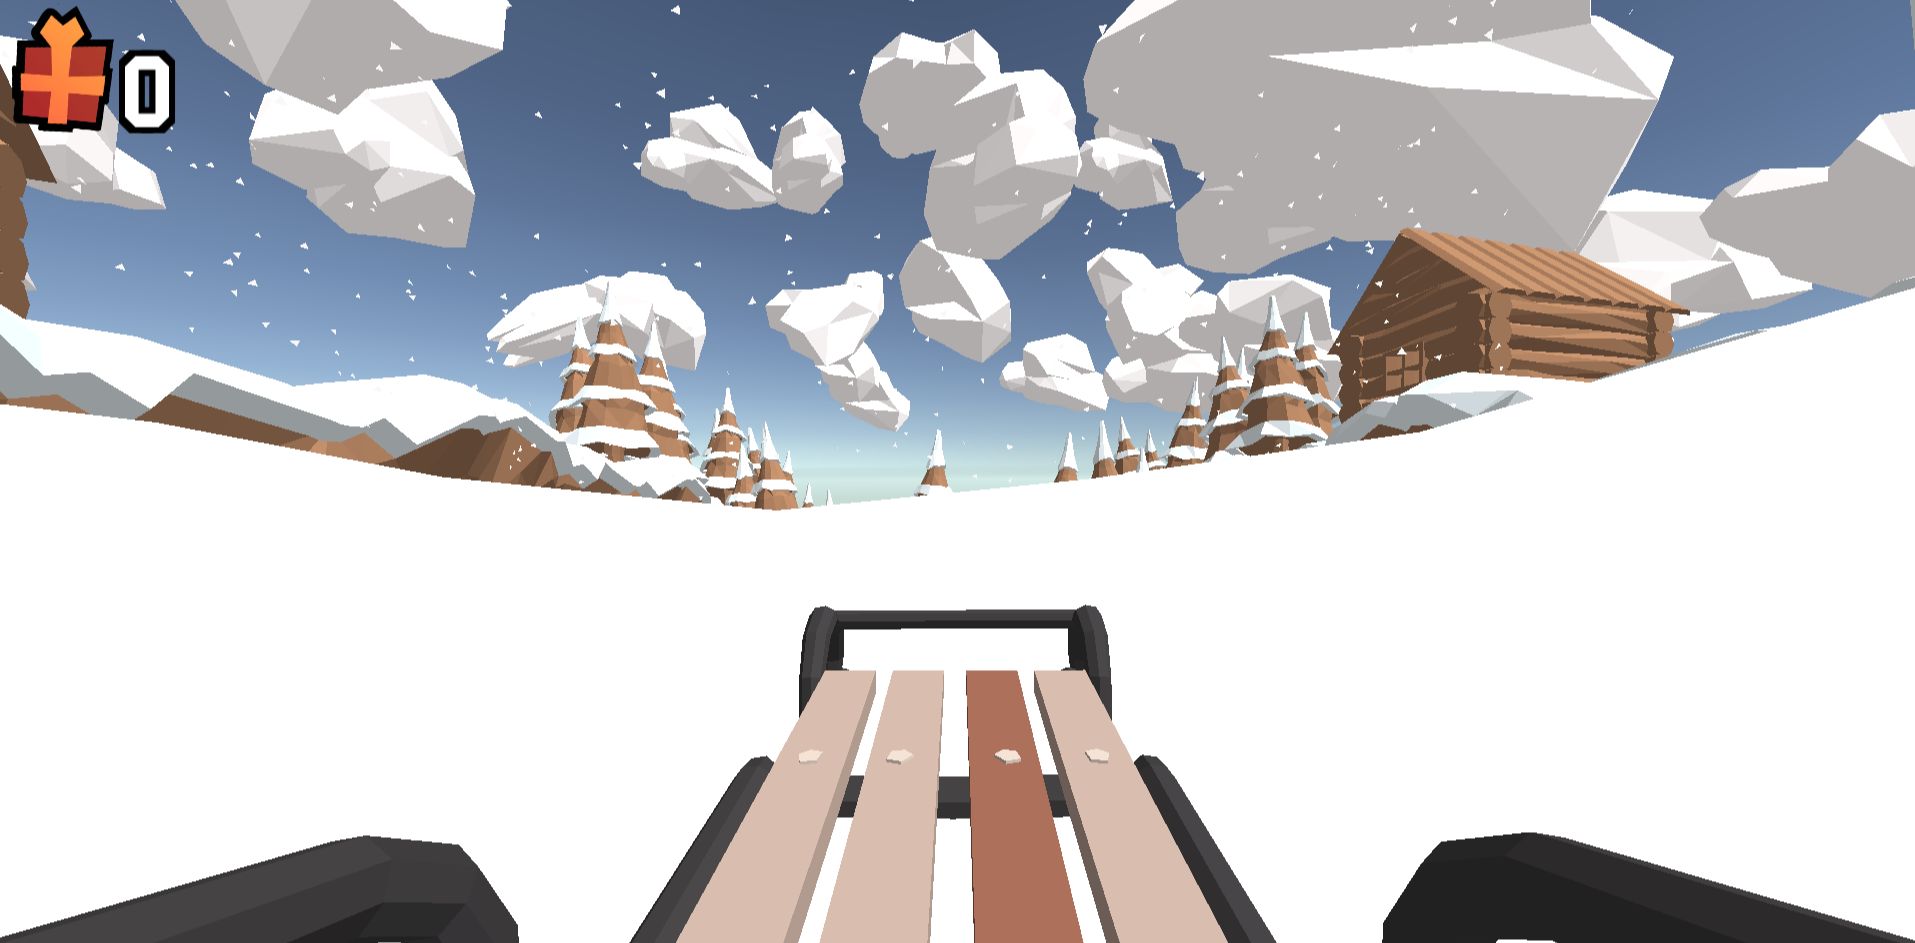 Snow Rider 3D - Android game screenshots.